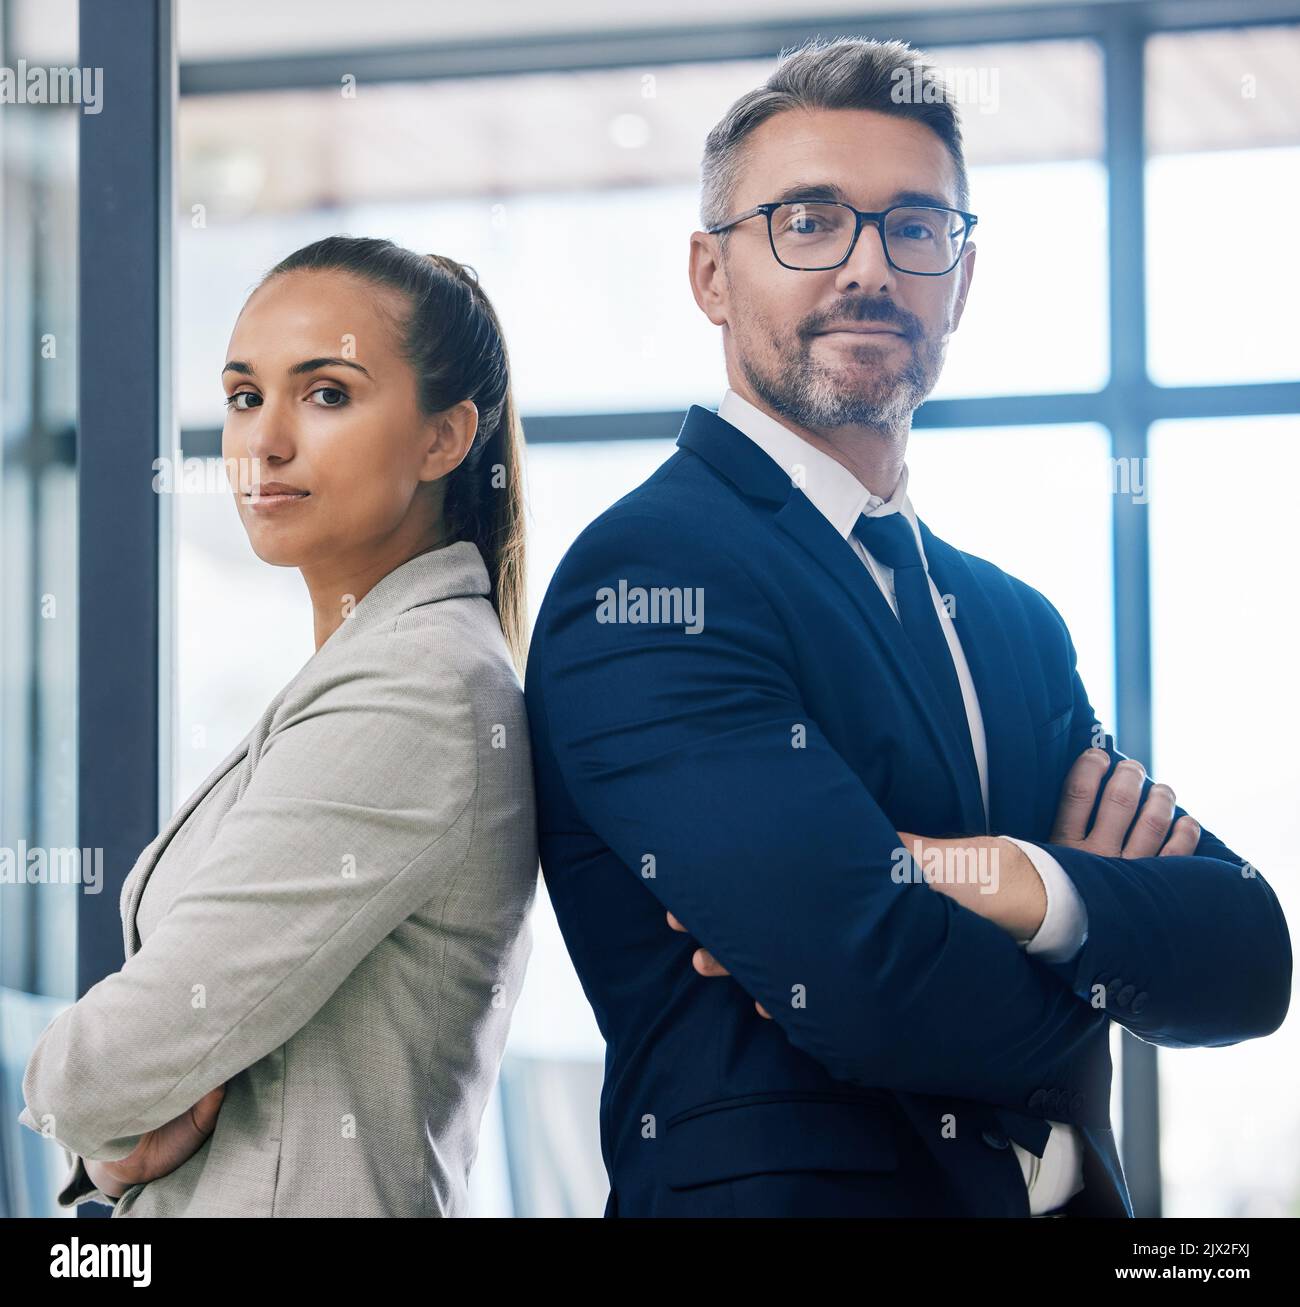 Partnership, arms crossed and teamwork with two business people standing together in corporate office building. Success, motivation and vision with Stock Photo